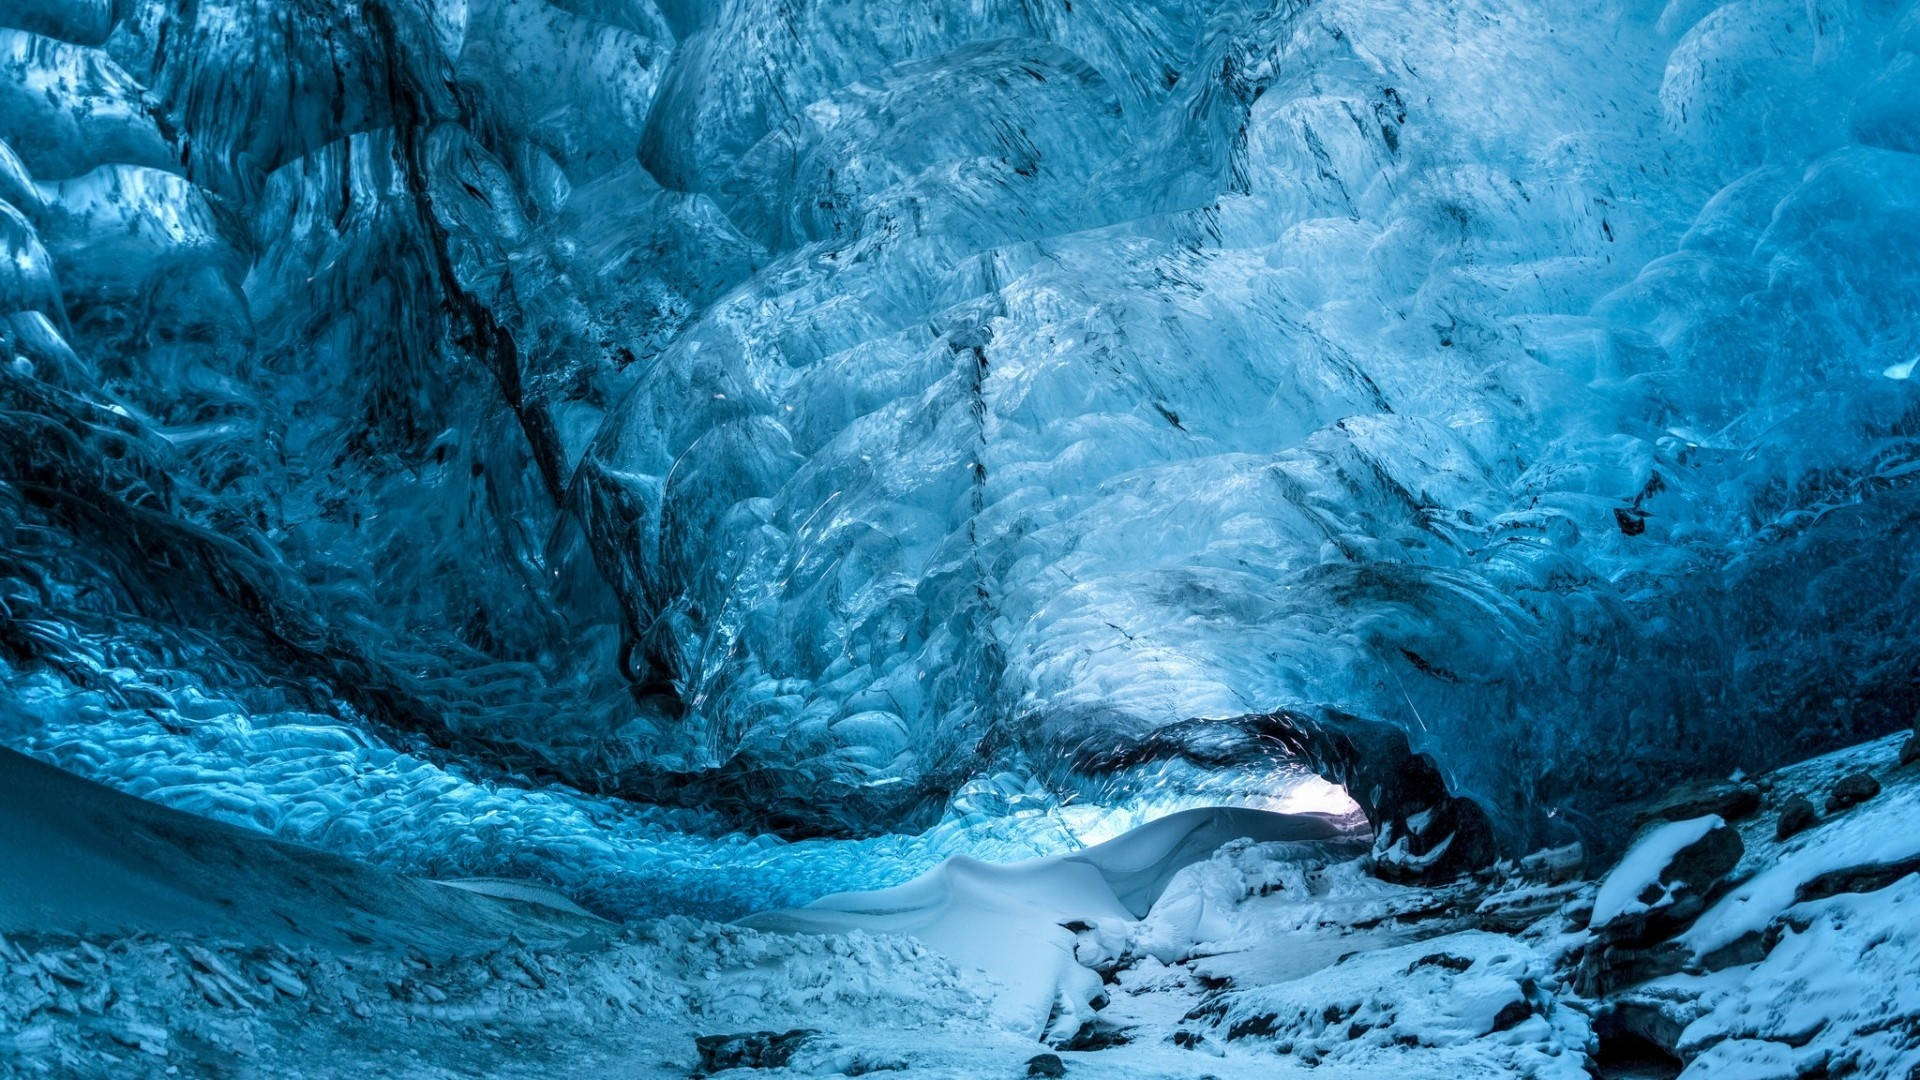 1920x1080 Hd Nature Ice Cave Background